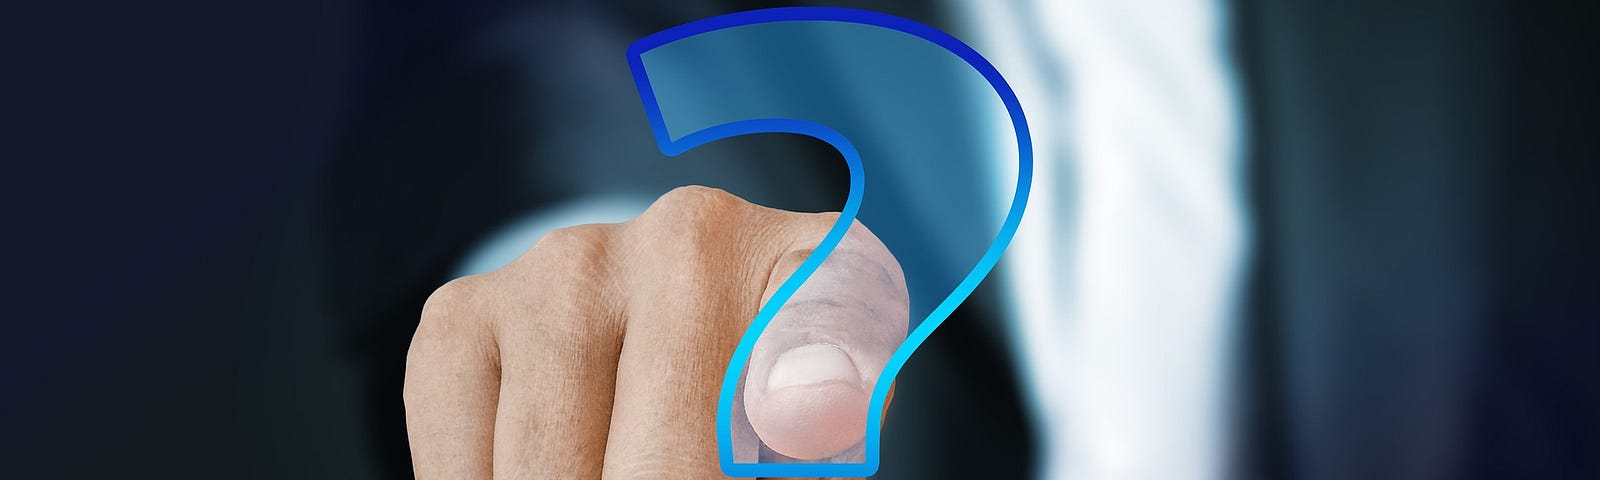 A person pointing a finger into a blue question mark